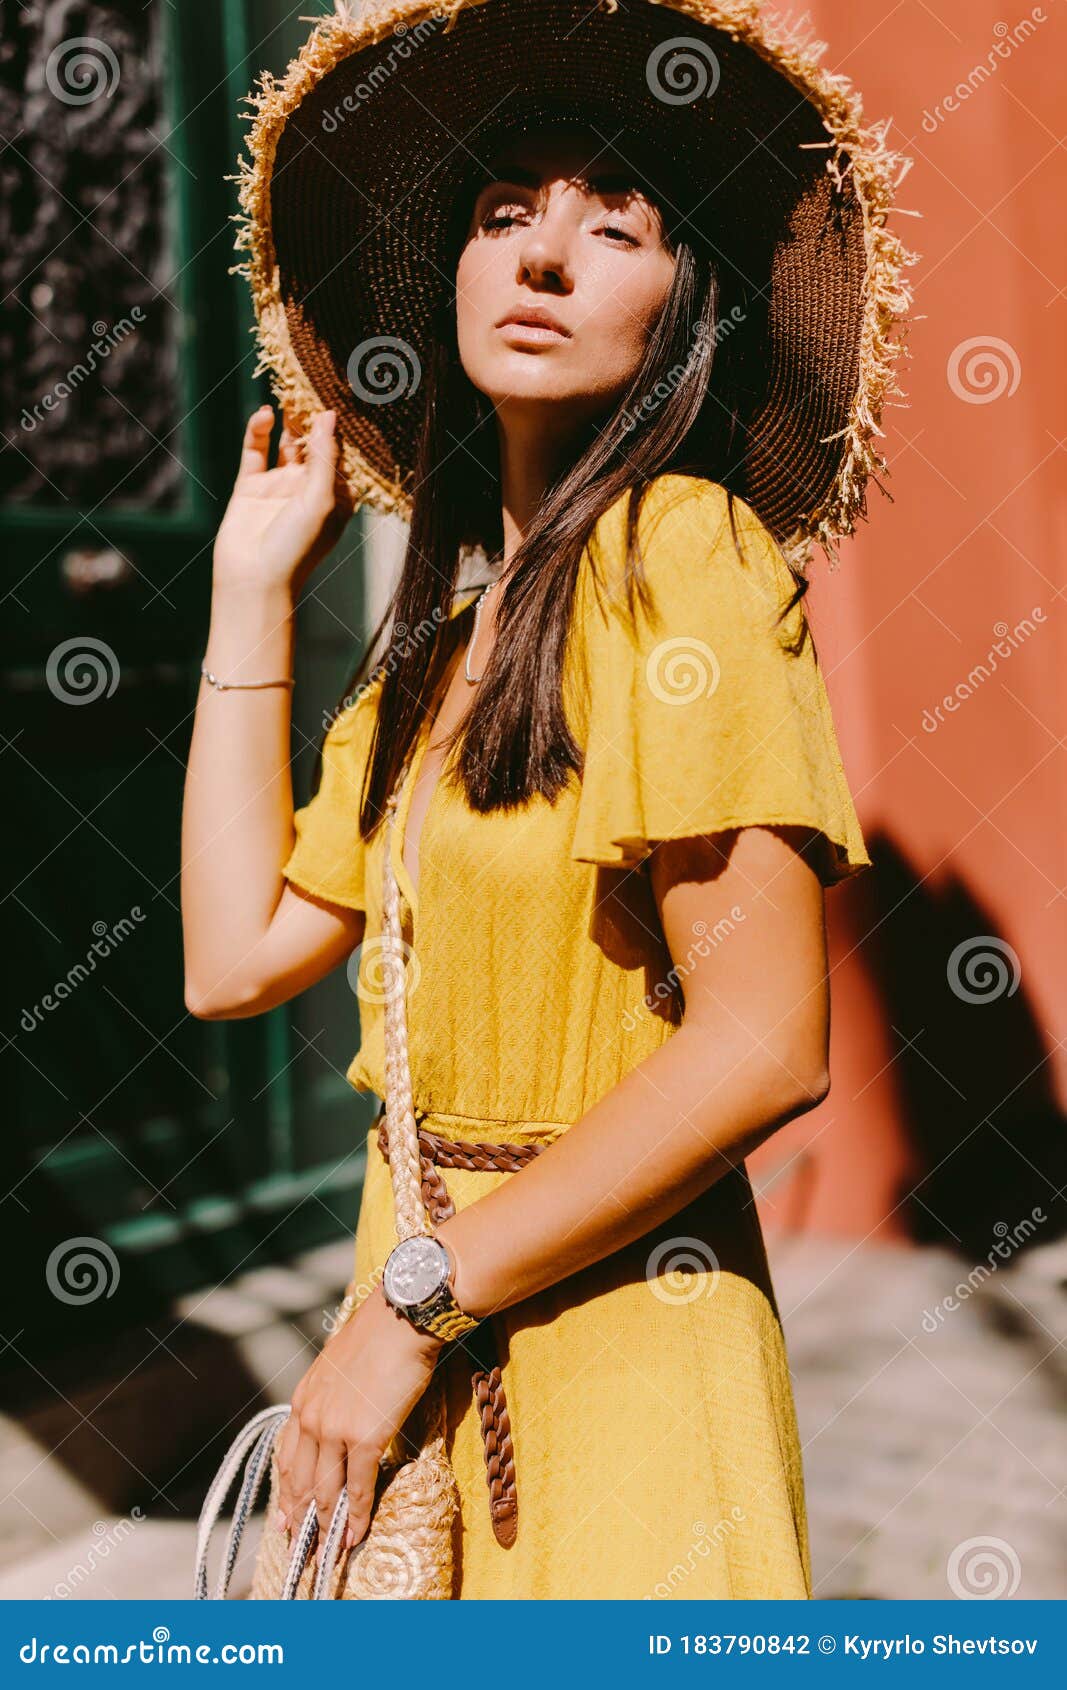 Attractive Woman in Summer Dress and Straw Hat with Handbag Walking ...